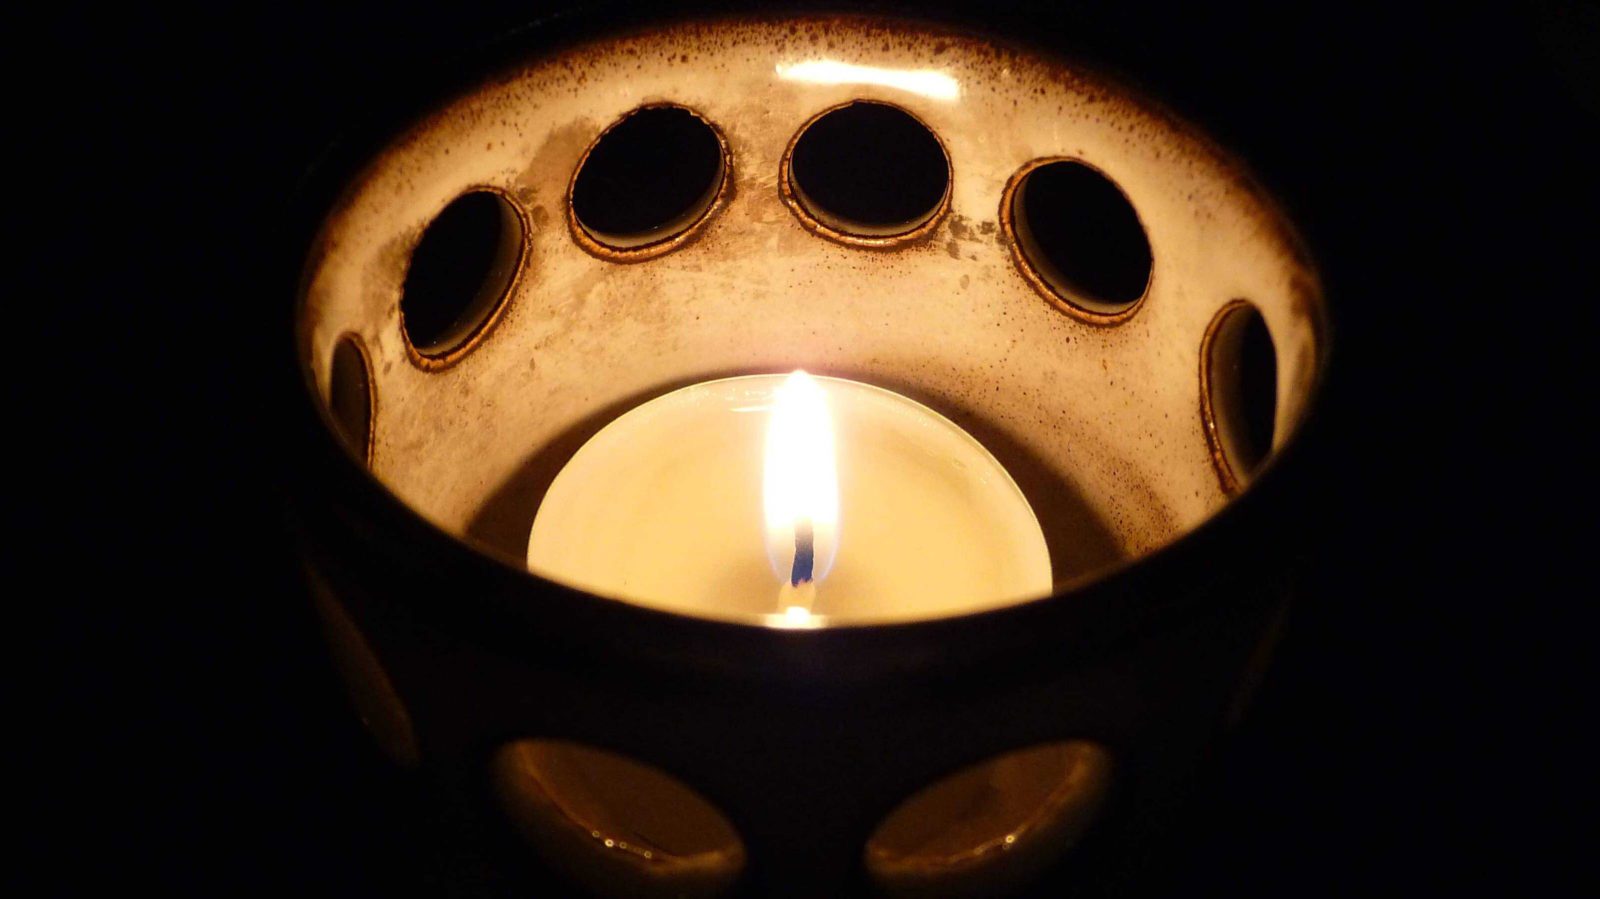 A candle burns in the dark.